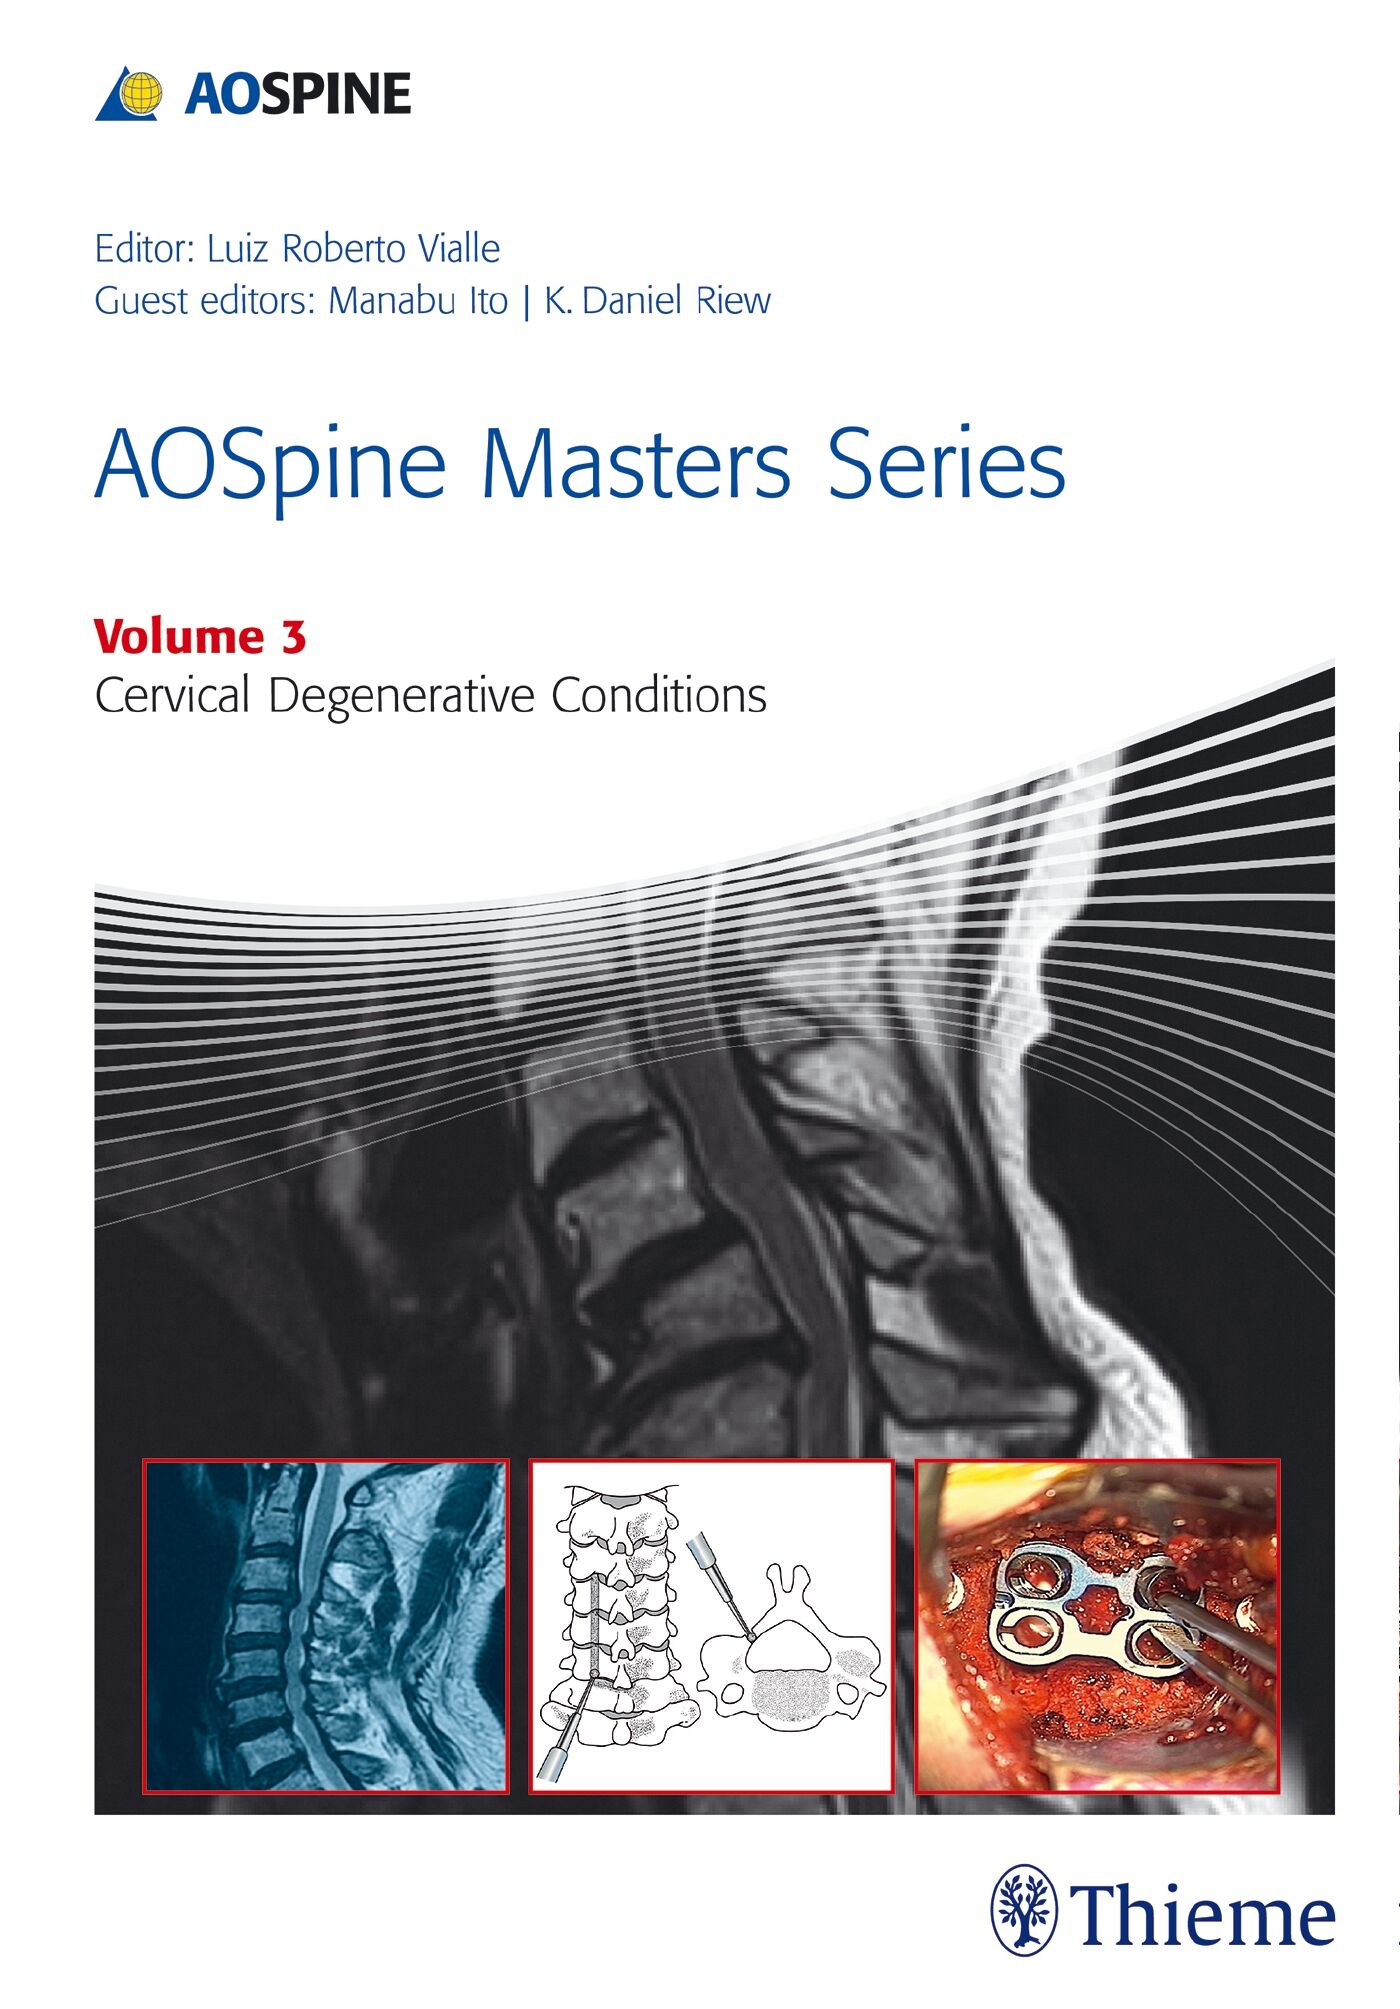 AOSpine Masters Series Volume 3: Cervical Degenerative Conditions, 9781626230507